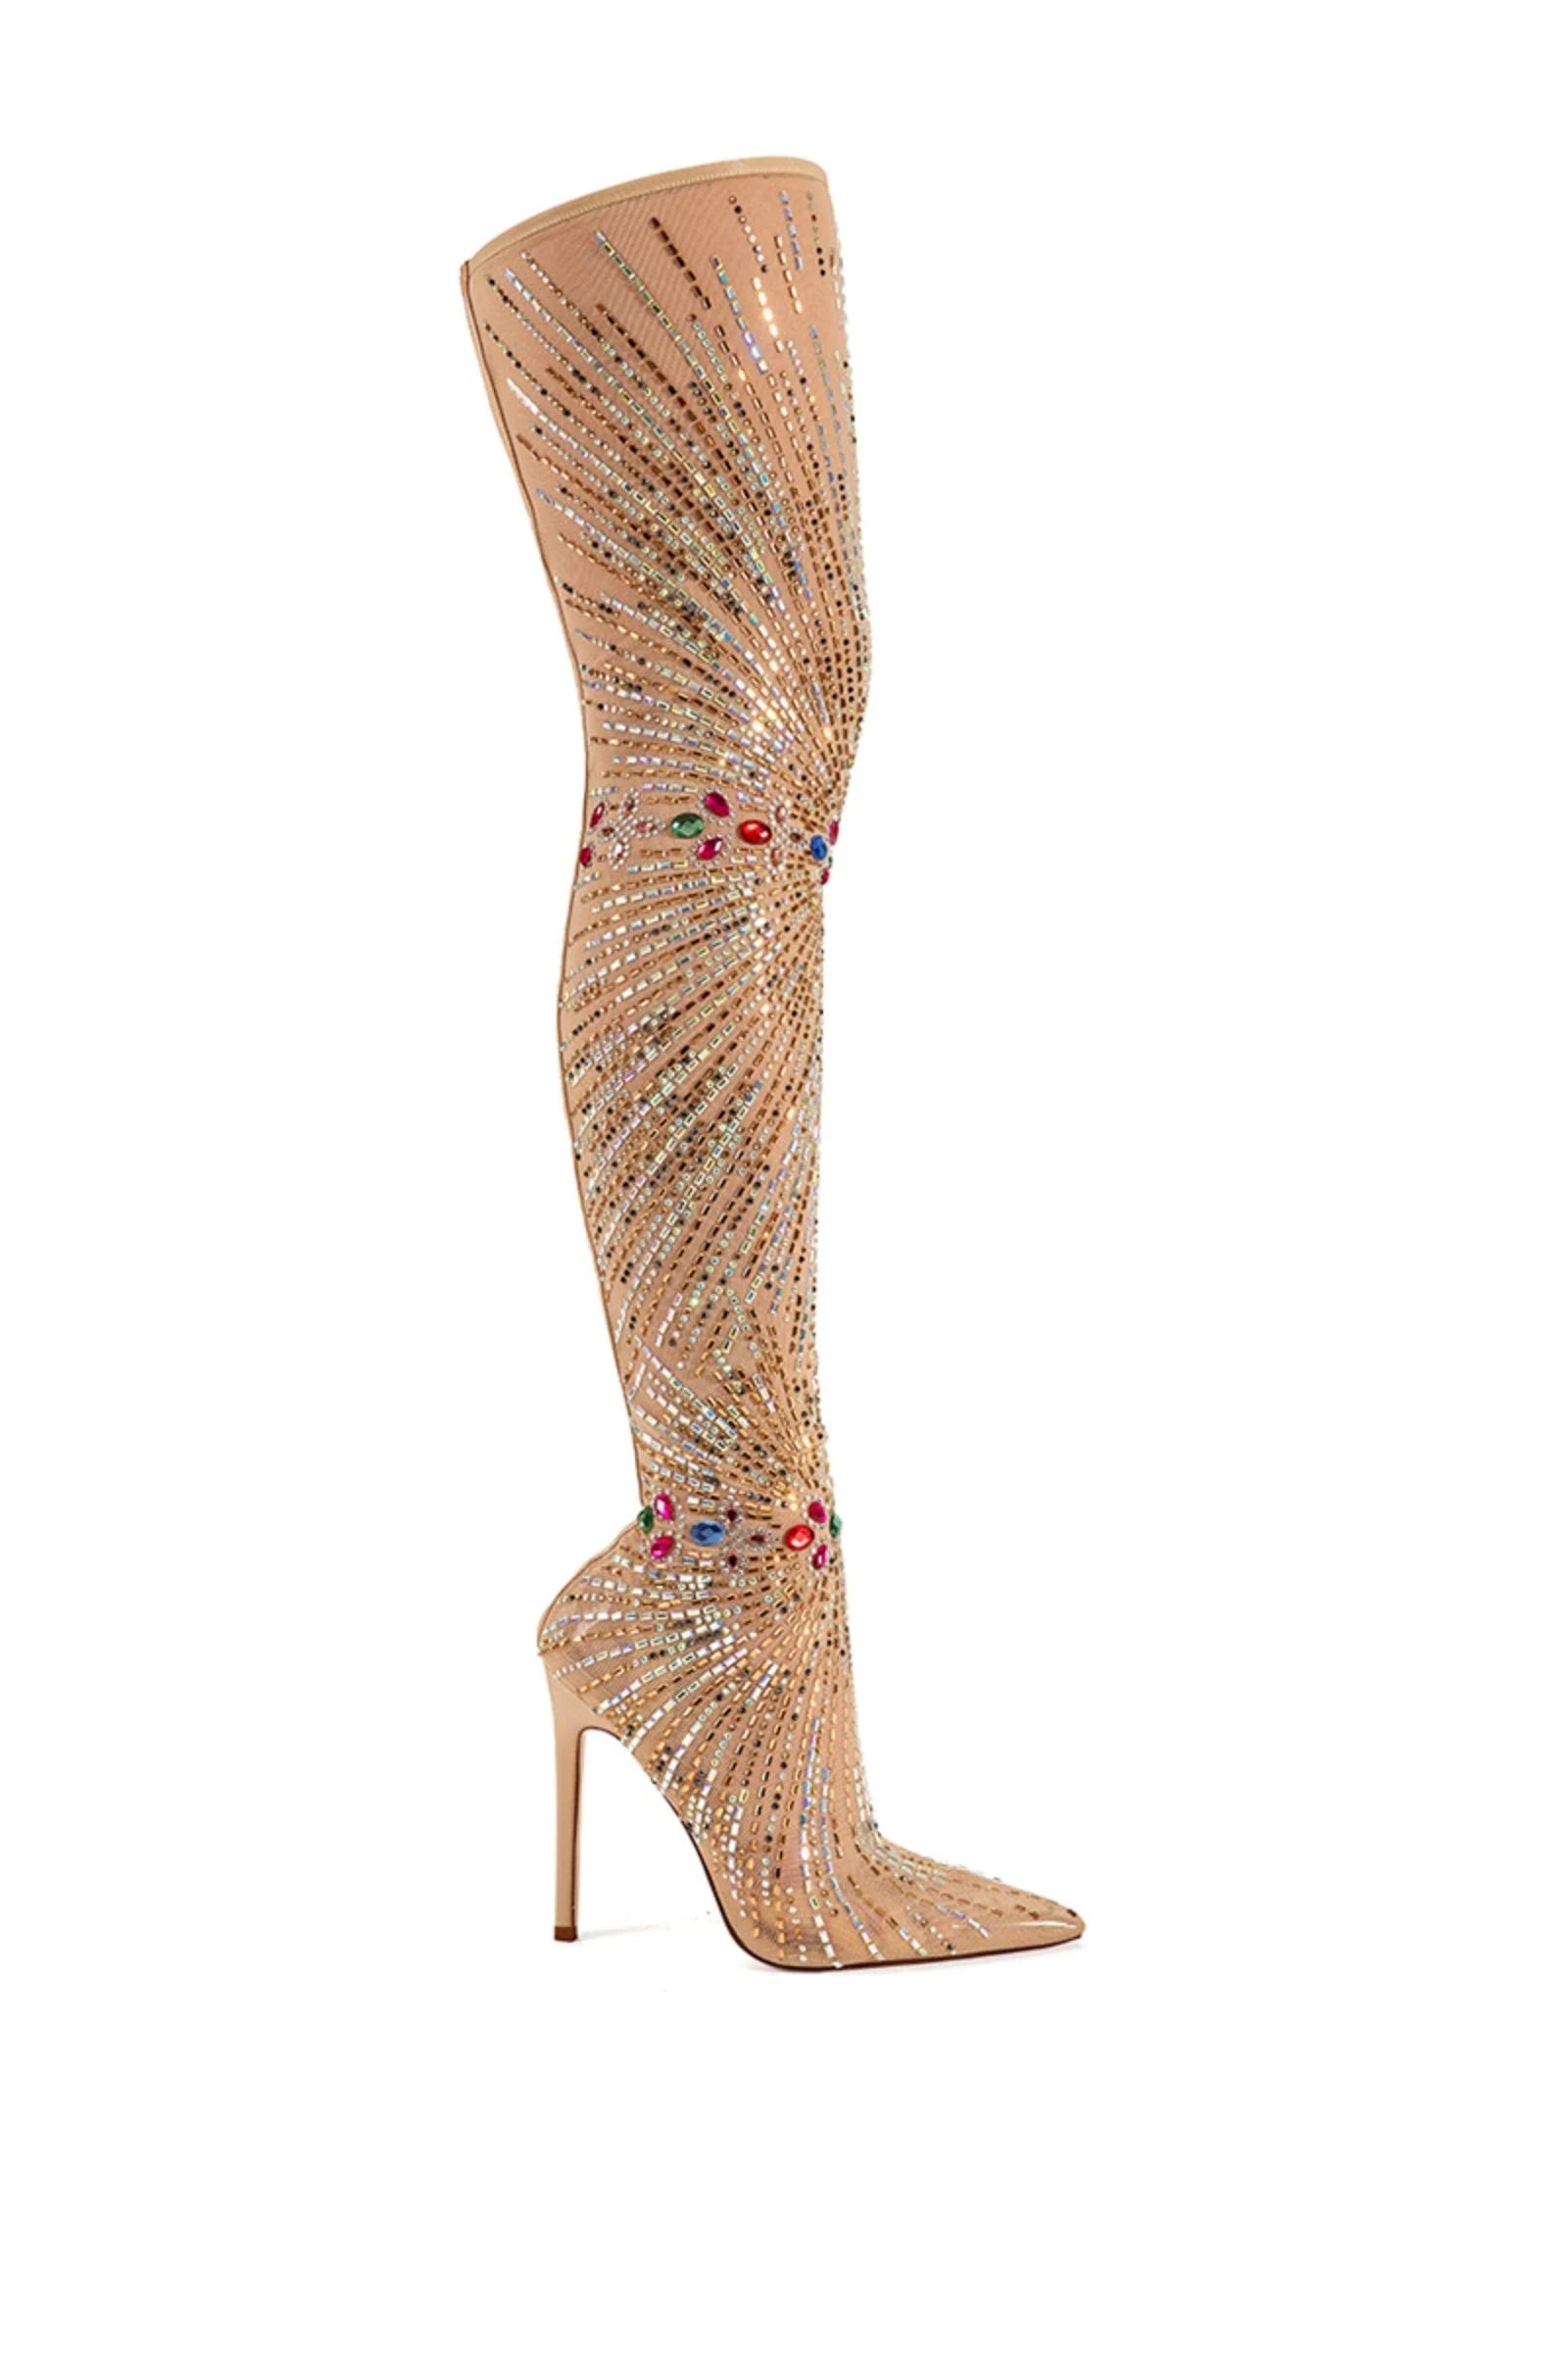 Stiletto Thigh High Rhinestone Boots: Elegant Crystal Design for Special Occasions | Image